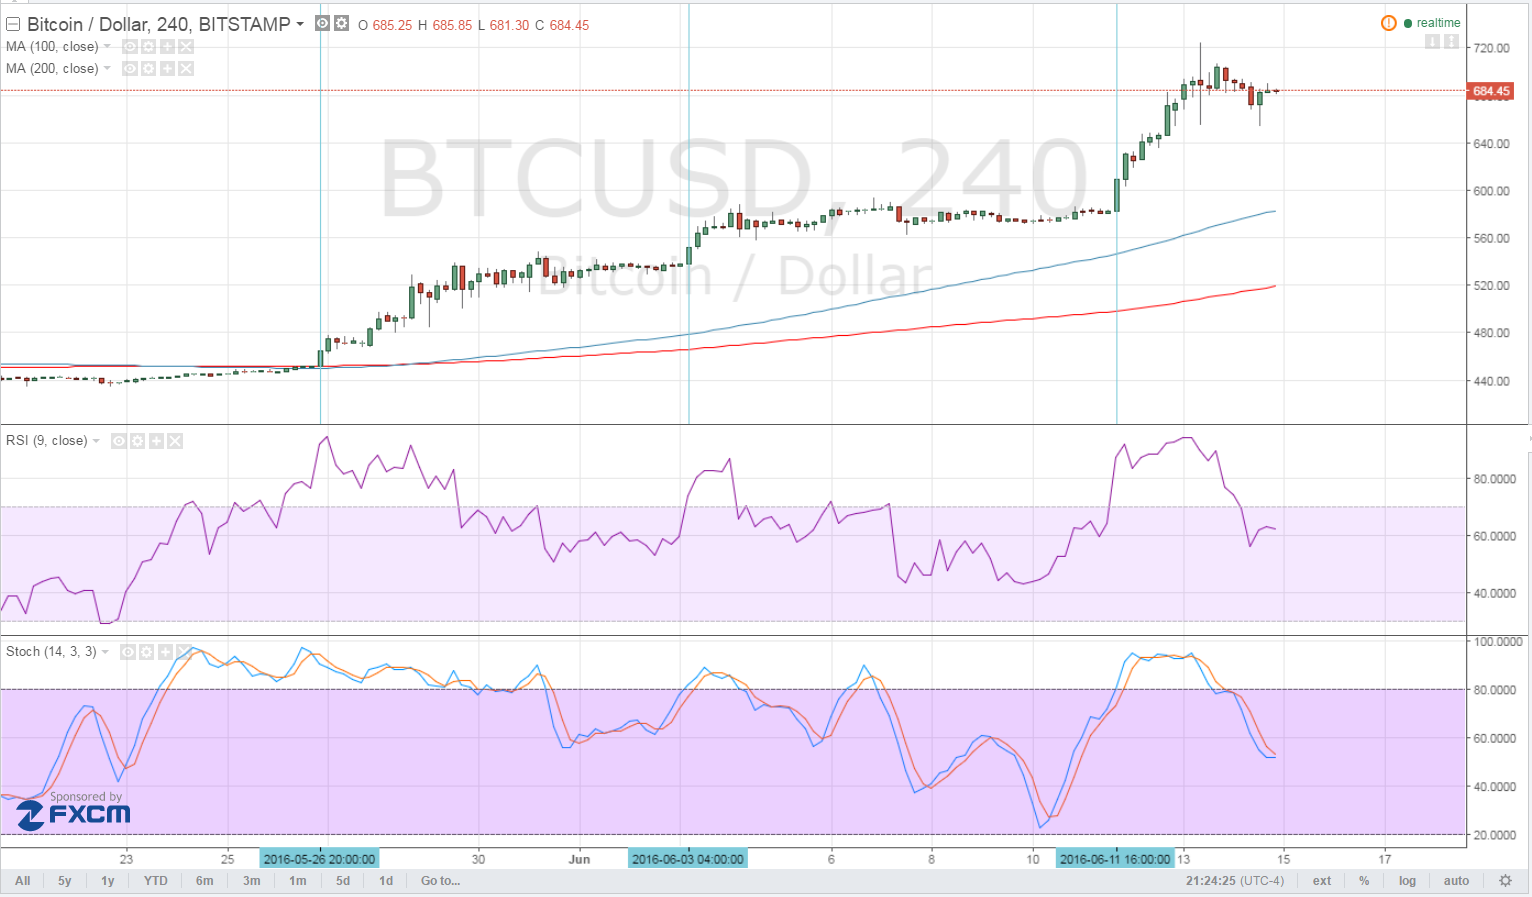 Bitcoin Price Technical Analysis for 06/15/2016 - Another Weekend Breakout?